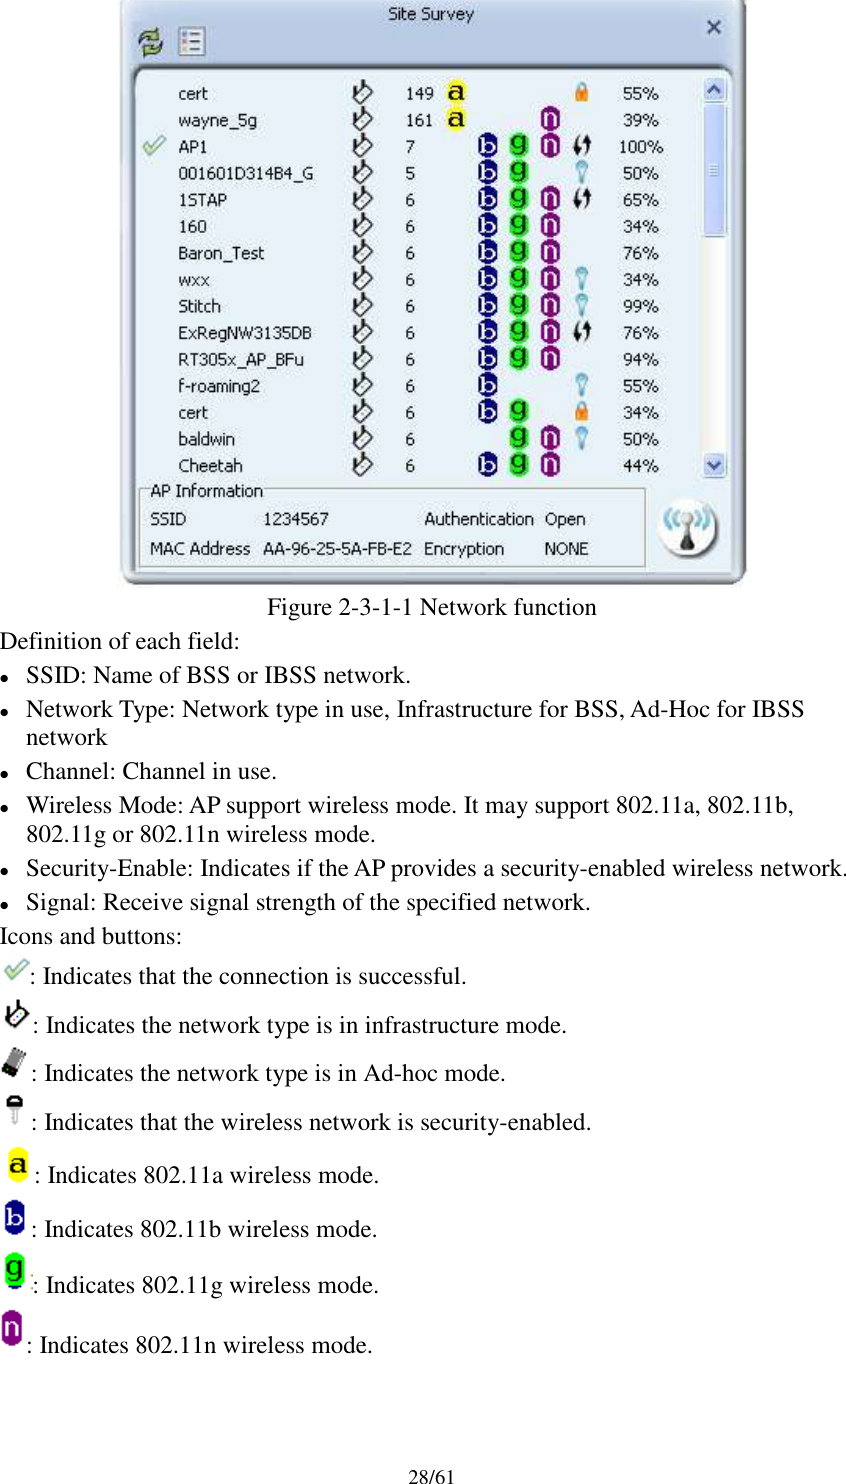 28/61Figure 2-3-1-1 Network functionDefinition of each field:SSID: Name of BSS or IBSS network.Network Type: Network type in use, Infrastructure for BSS, Ad-Hoc for IBSSnetworkChannel: Channel in use.Wireless Mode: AP support wireless mode. It may support 802.11a, 802.11b,802.11g or 802.11n wireless mode.Security-Enable: Indicates if the AP provides a security-enabled wireless network.Signal: Receive signal strength of the specified network.Icons and buttons:: Indicates that the connection is successful.: Indicates the network type is in infrastructure mode.: Indicates the network type is in Ad-hoc mode.: Indicates that the wireless network is security-enabled.: Indicates 802.11a wireless mode.: Indicates 802.11b wireless mode.: Indicates 802.11g wireless mode.: Indicates 802.11n wireless mode.